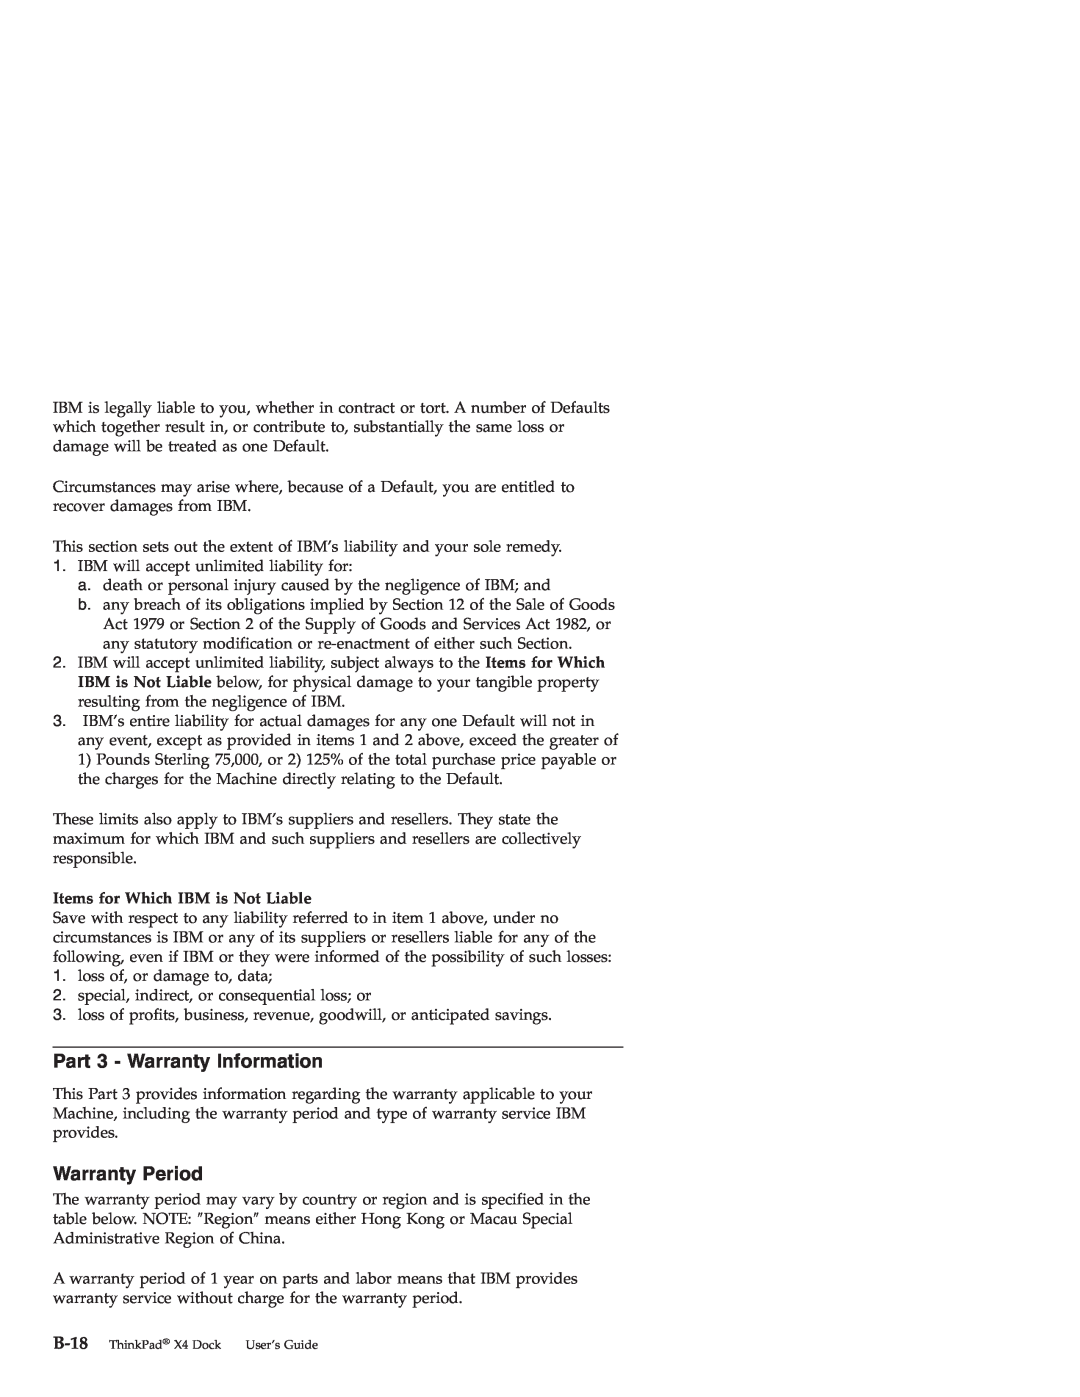 IBM X4 manual Part 3 - Warranty Information, Warranty Period, Items for Which IBM is Not Liable 